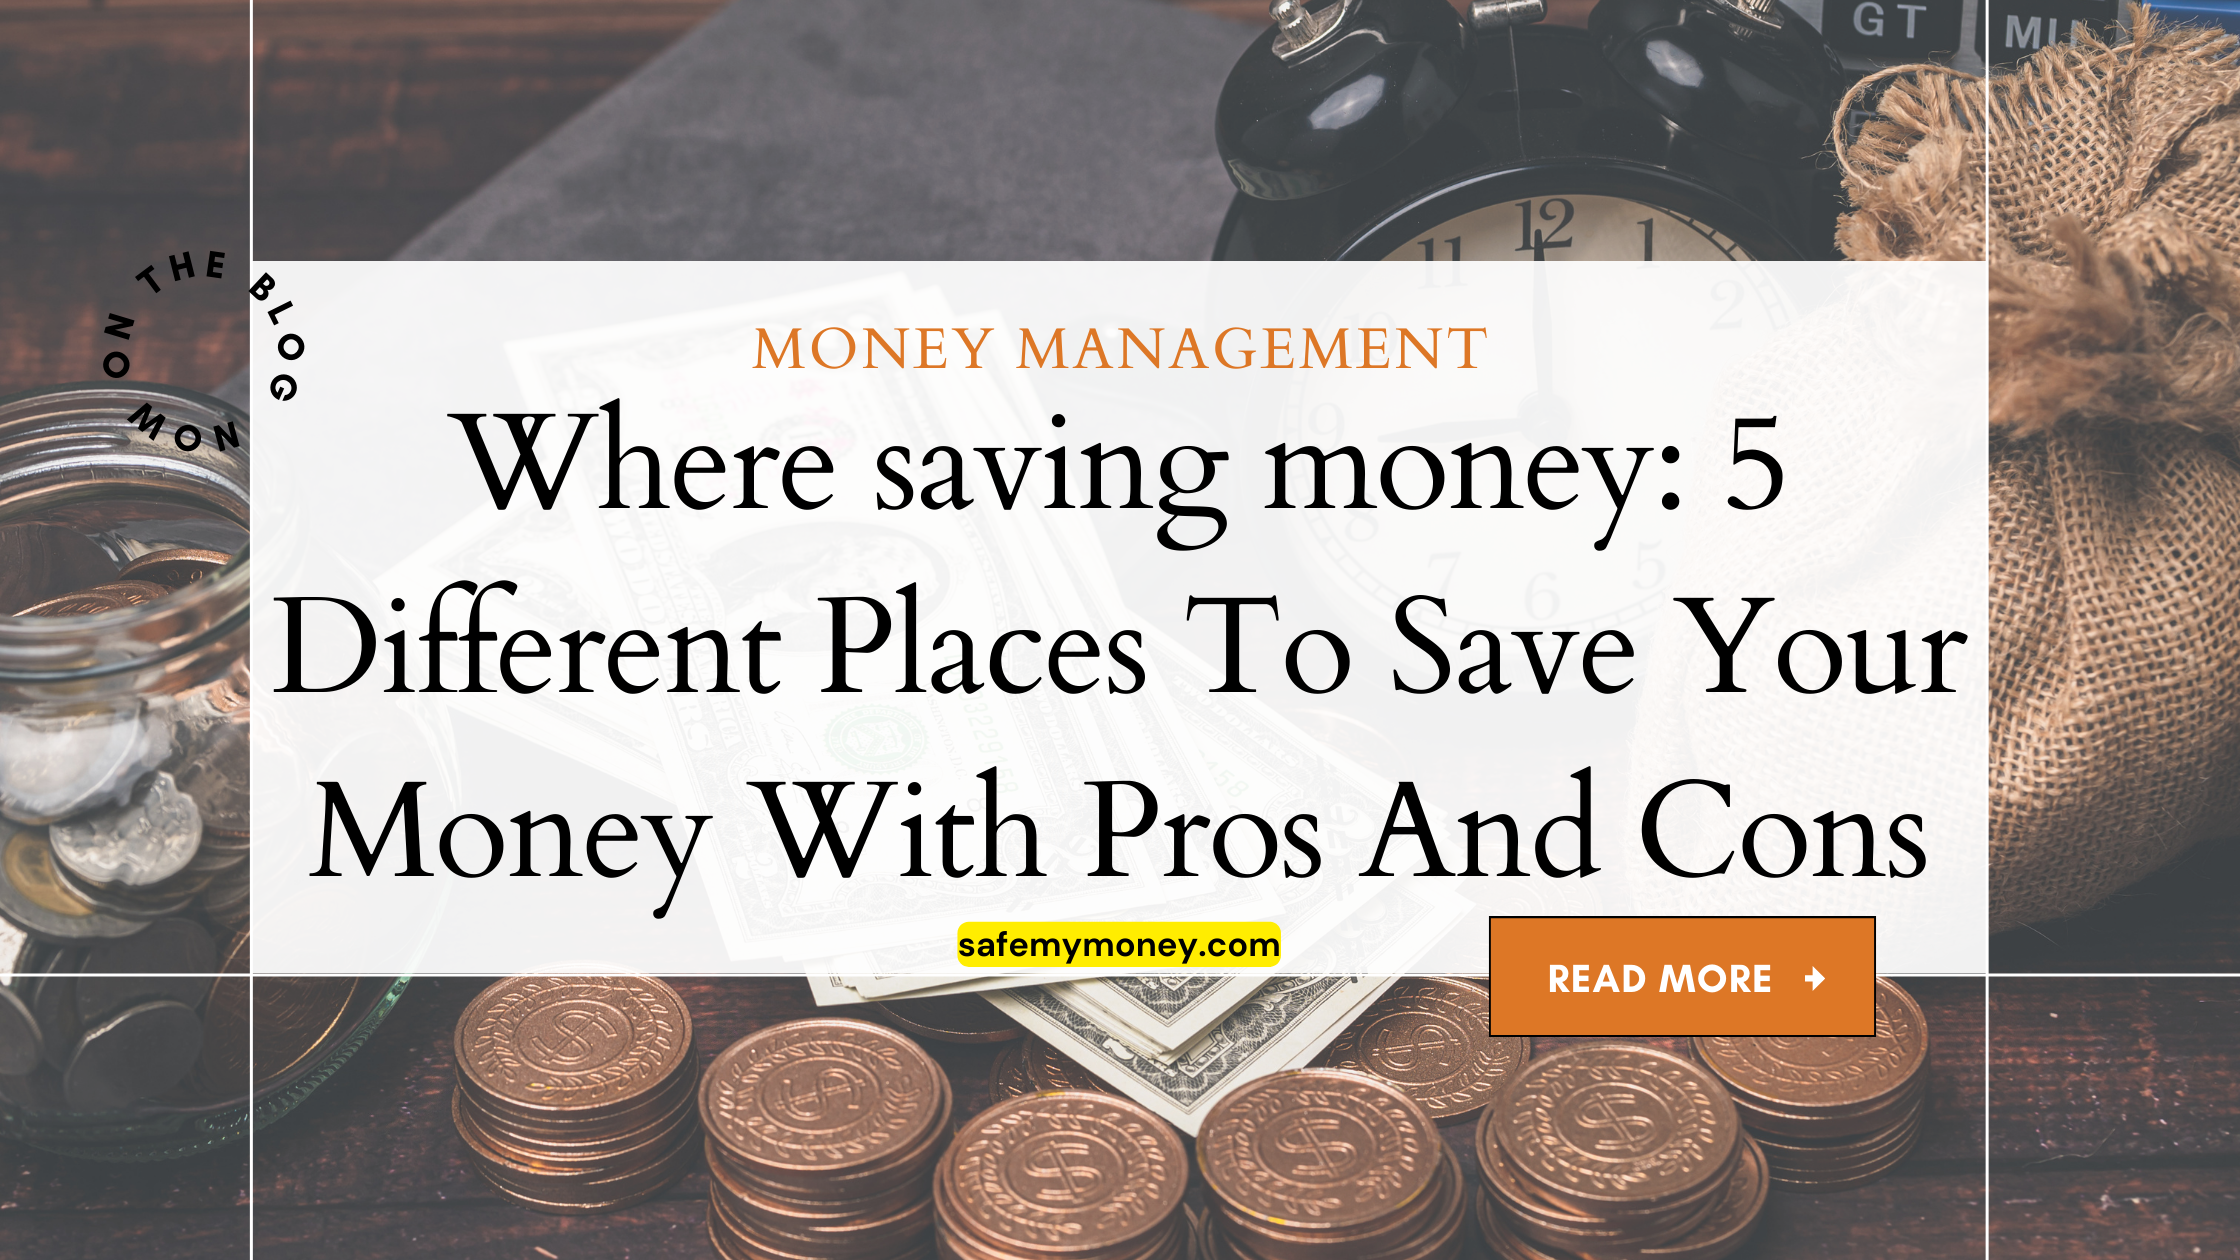 Blog Thumbnail: Where saving money: 5 Different Places To Save Your Money With Pros And Cons